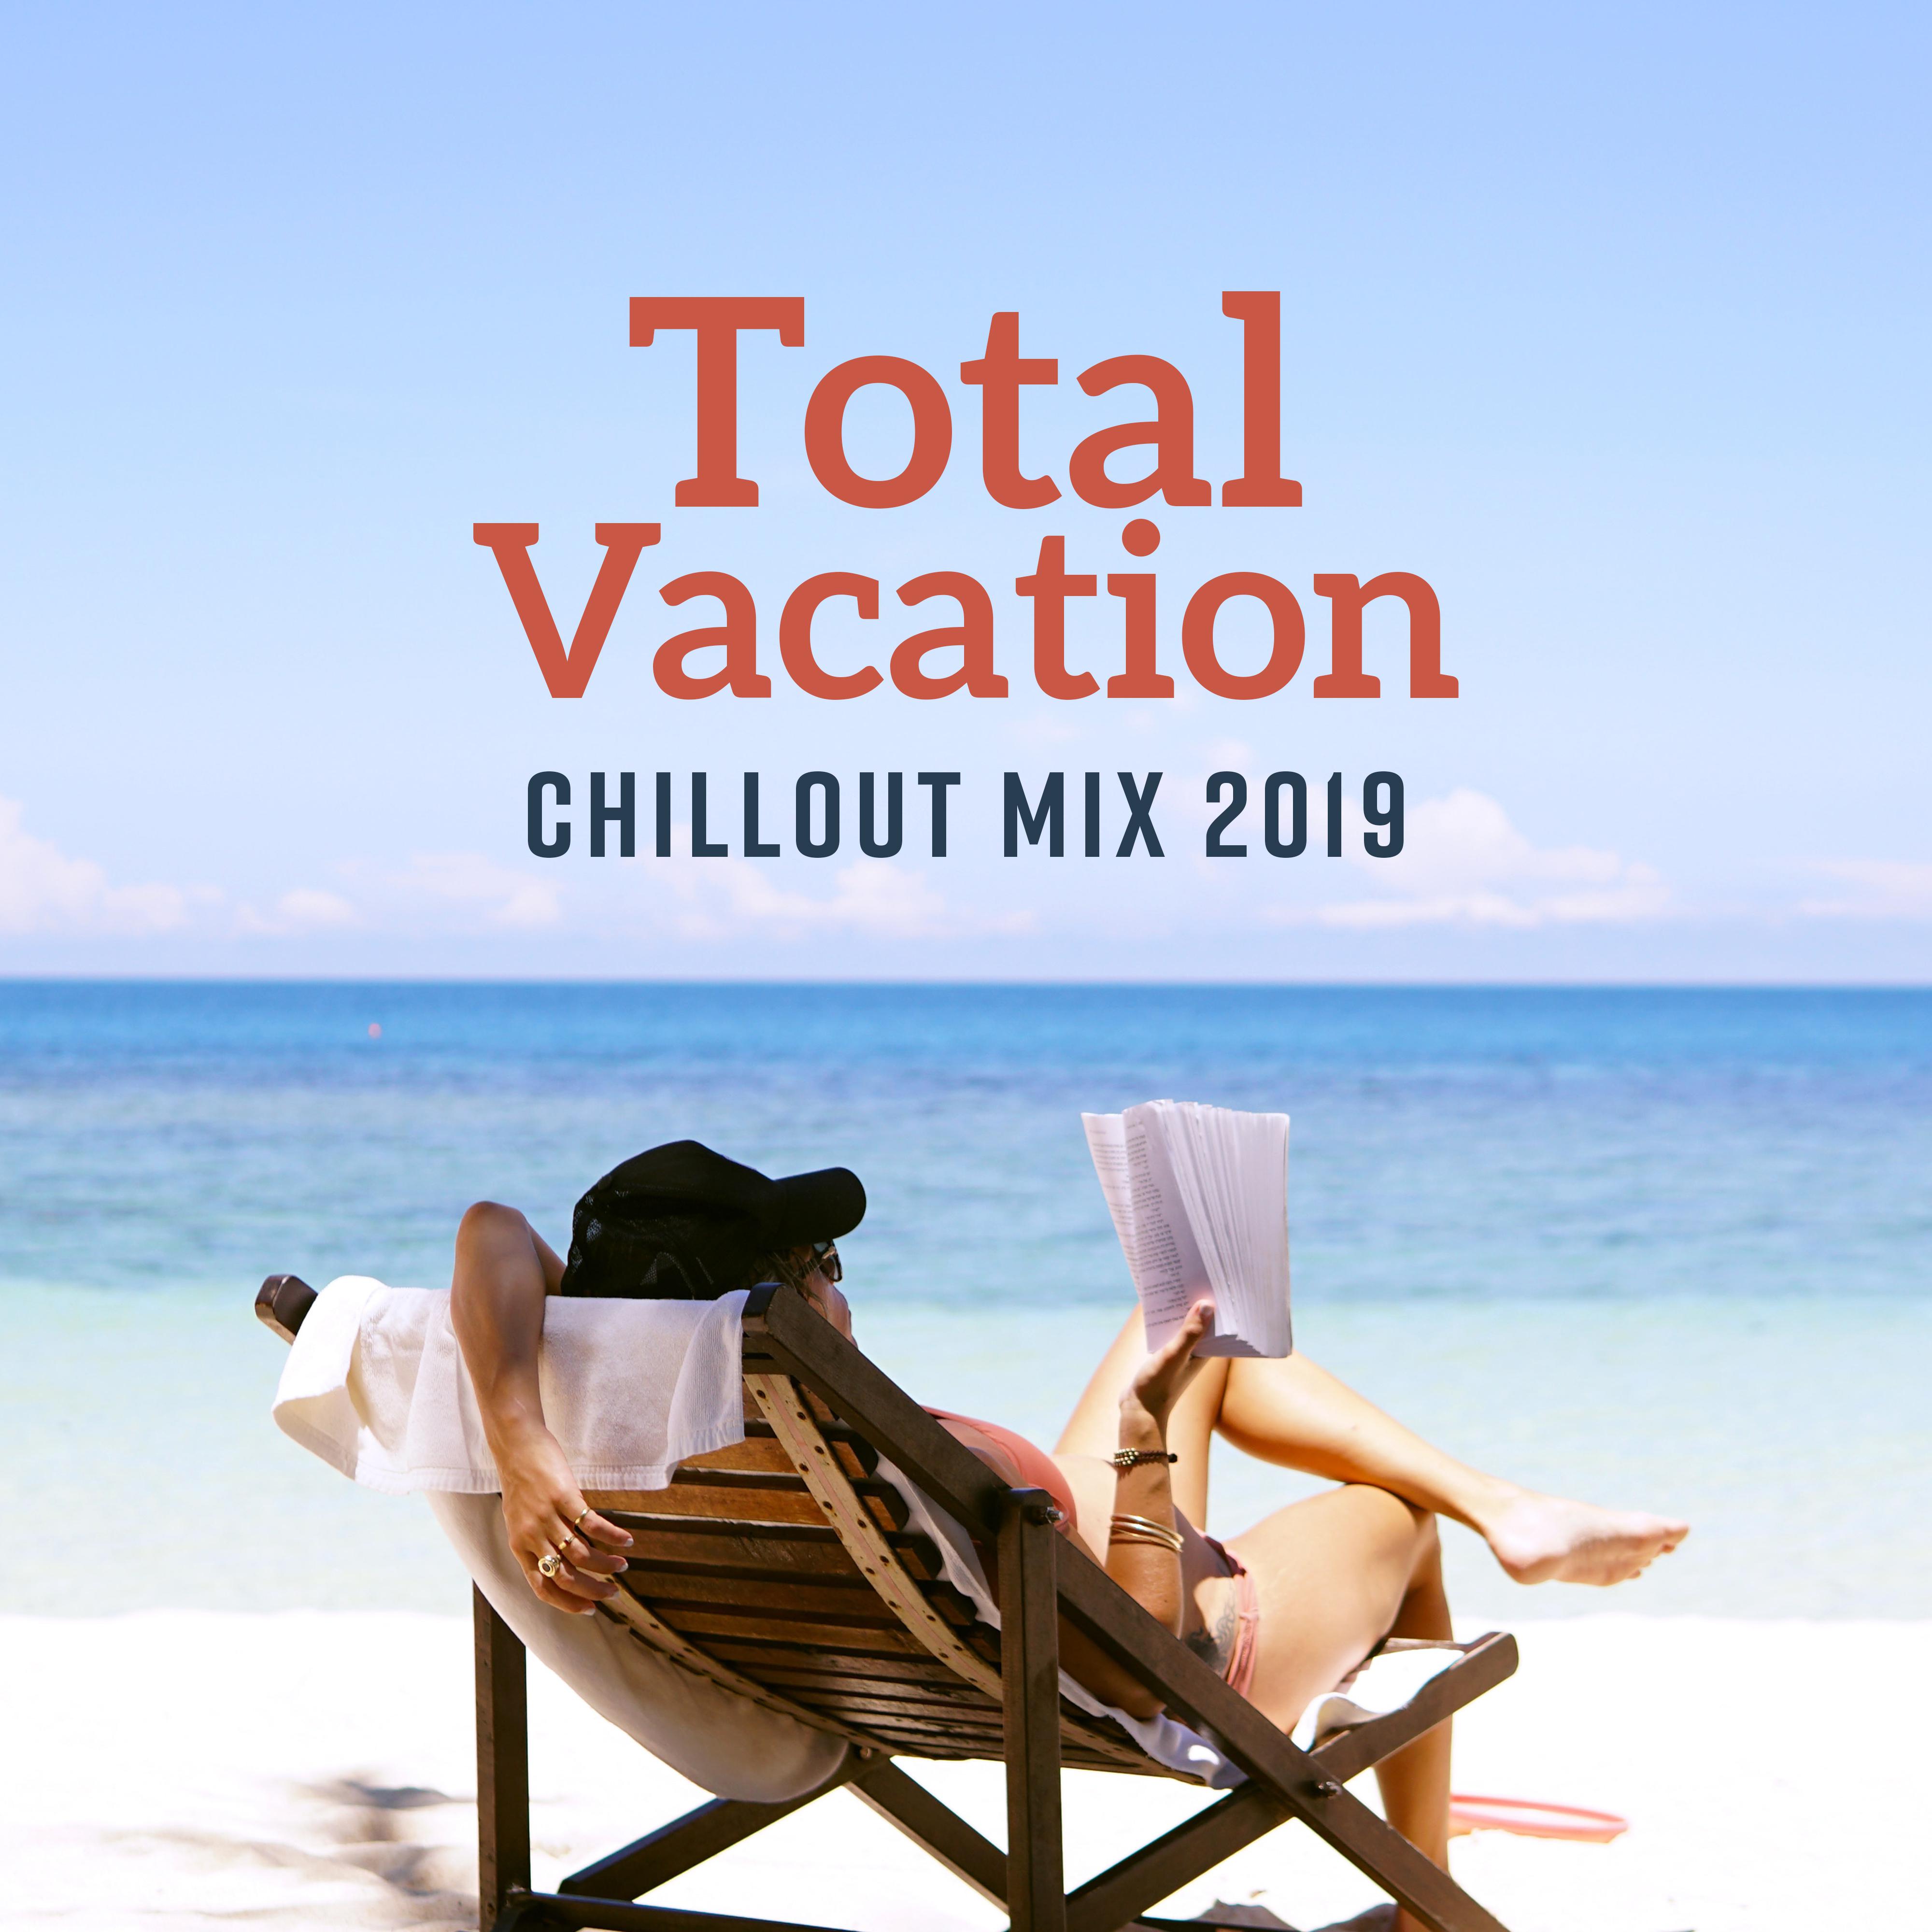 Total Vacation Chillout Mix 2019: Perfect Chill Out Music Compilation with Deep Vibes & Energetic Beats, Pure Relaxation on the Beach, Restful Songs, Calming Down Melodies